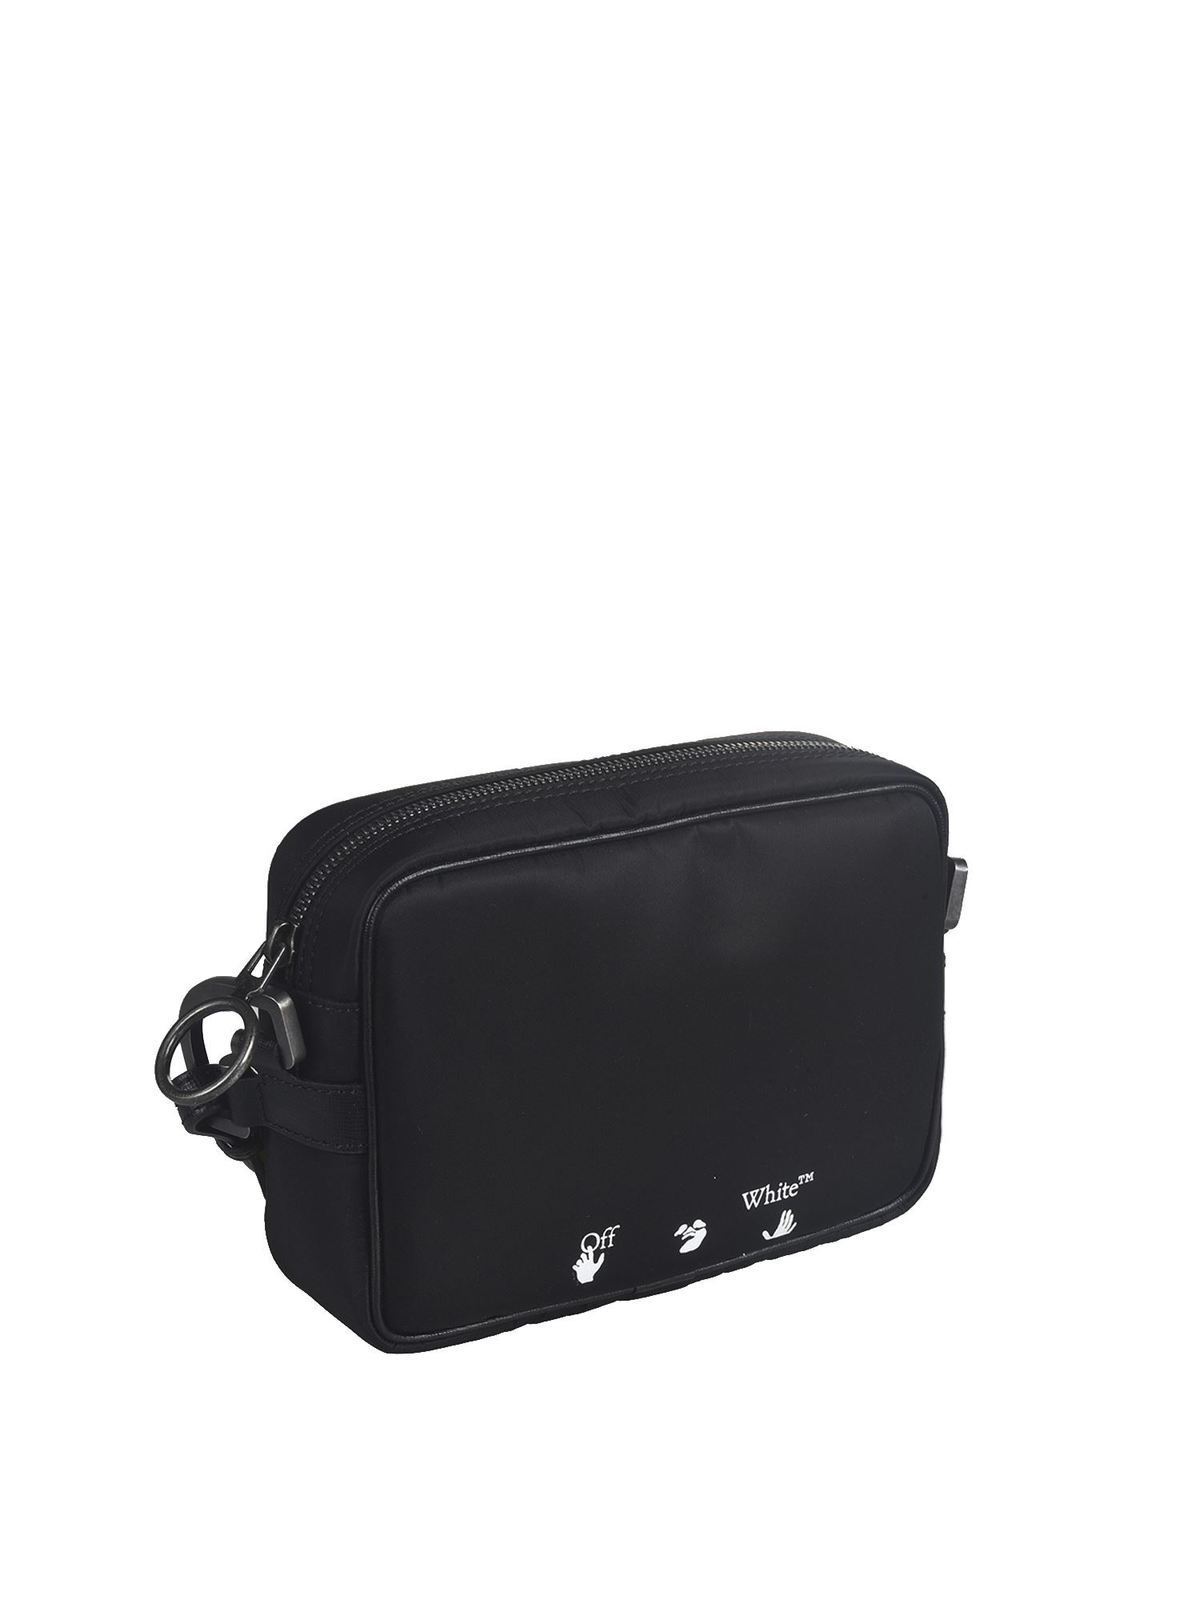 Cross body bags Off-White - Bag with Industrial shoulder strap in black -  OMNA049F20FAB0011001